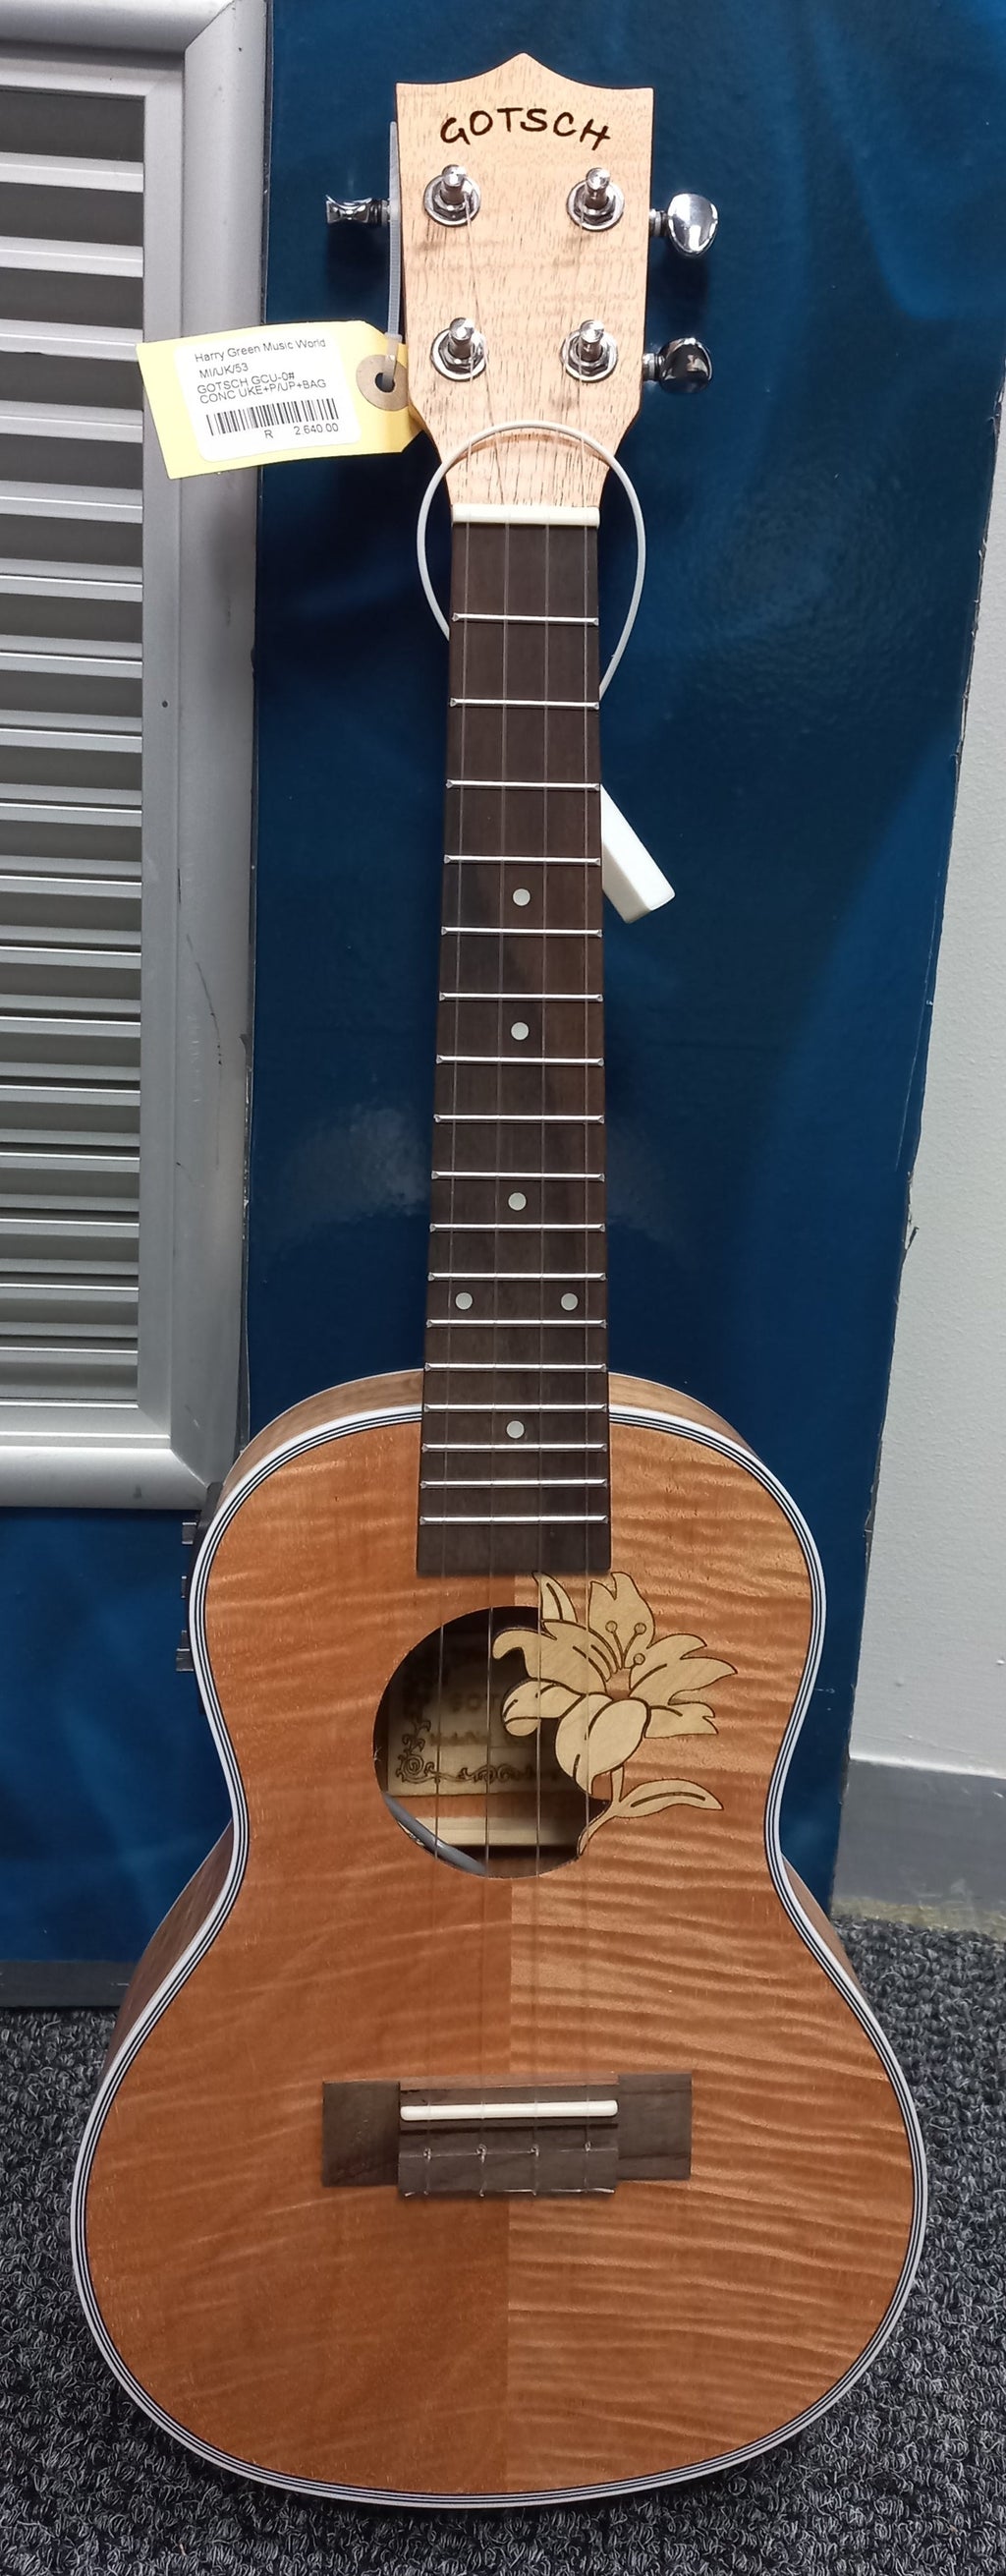 GOTSCH LILY FLOWER CONCERT UKULELE WITH PICK-UP